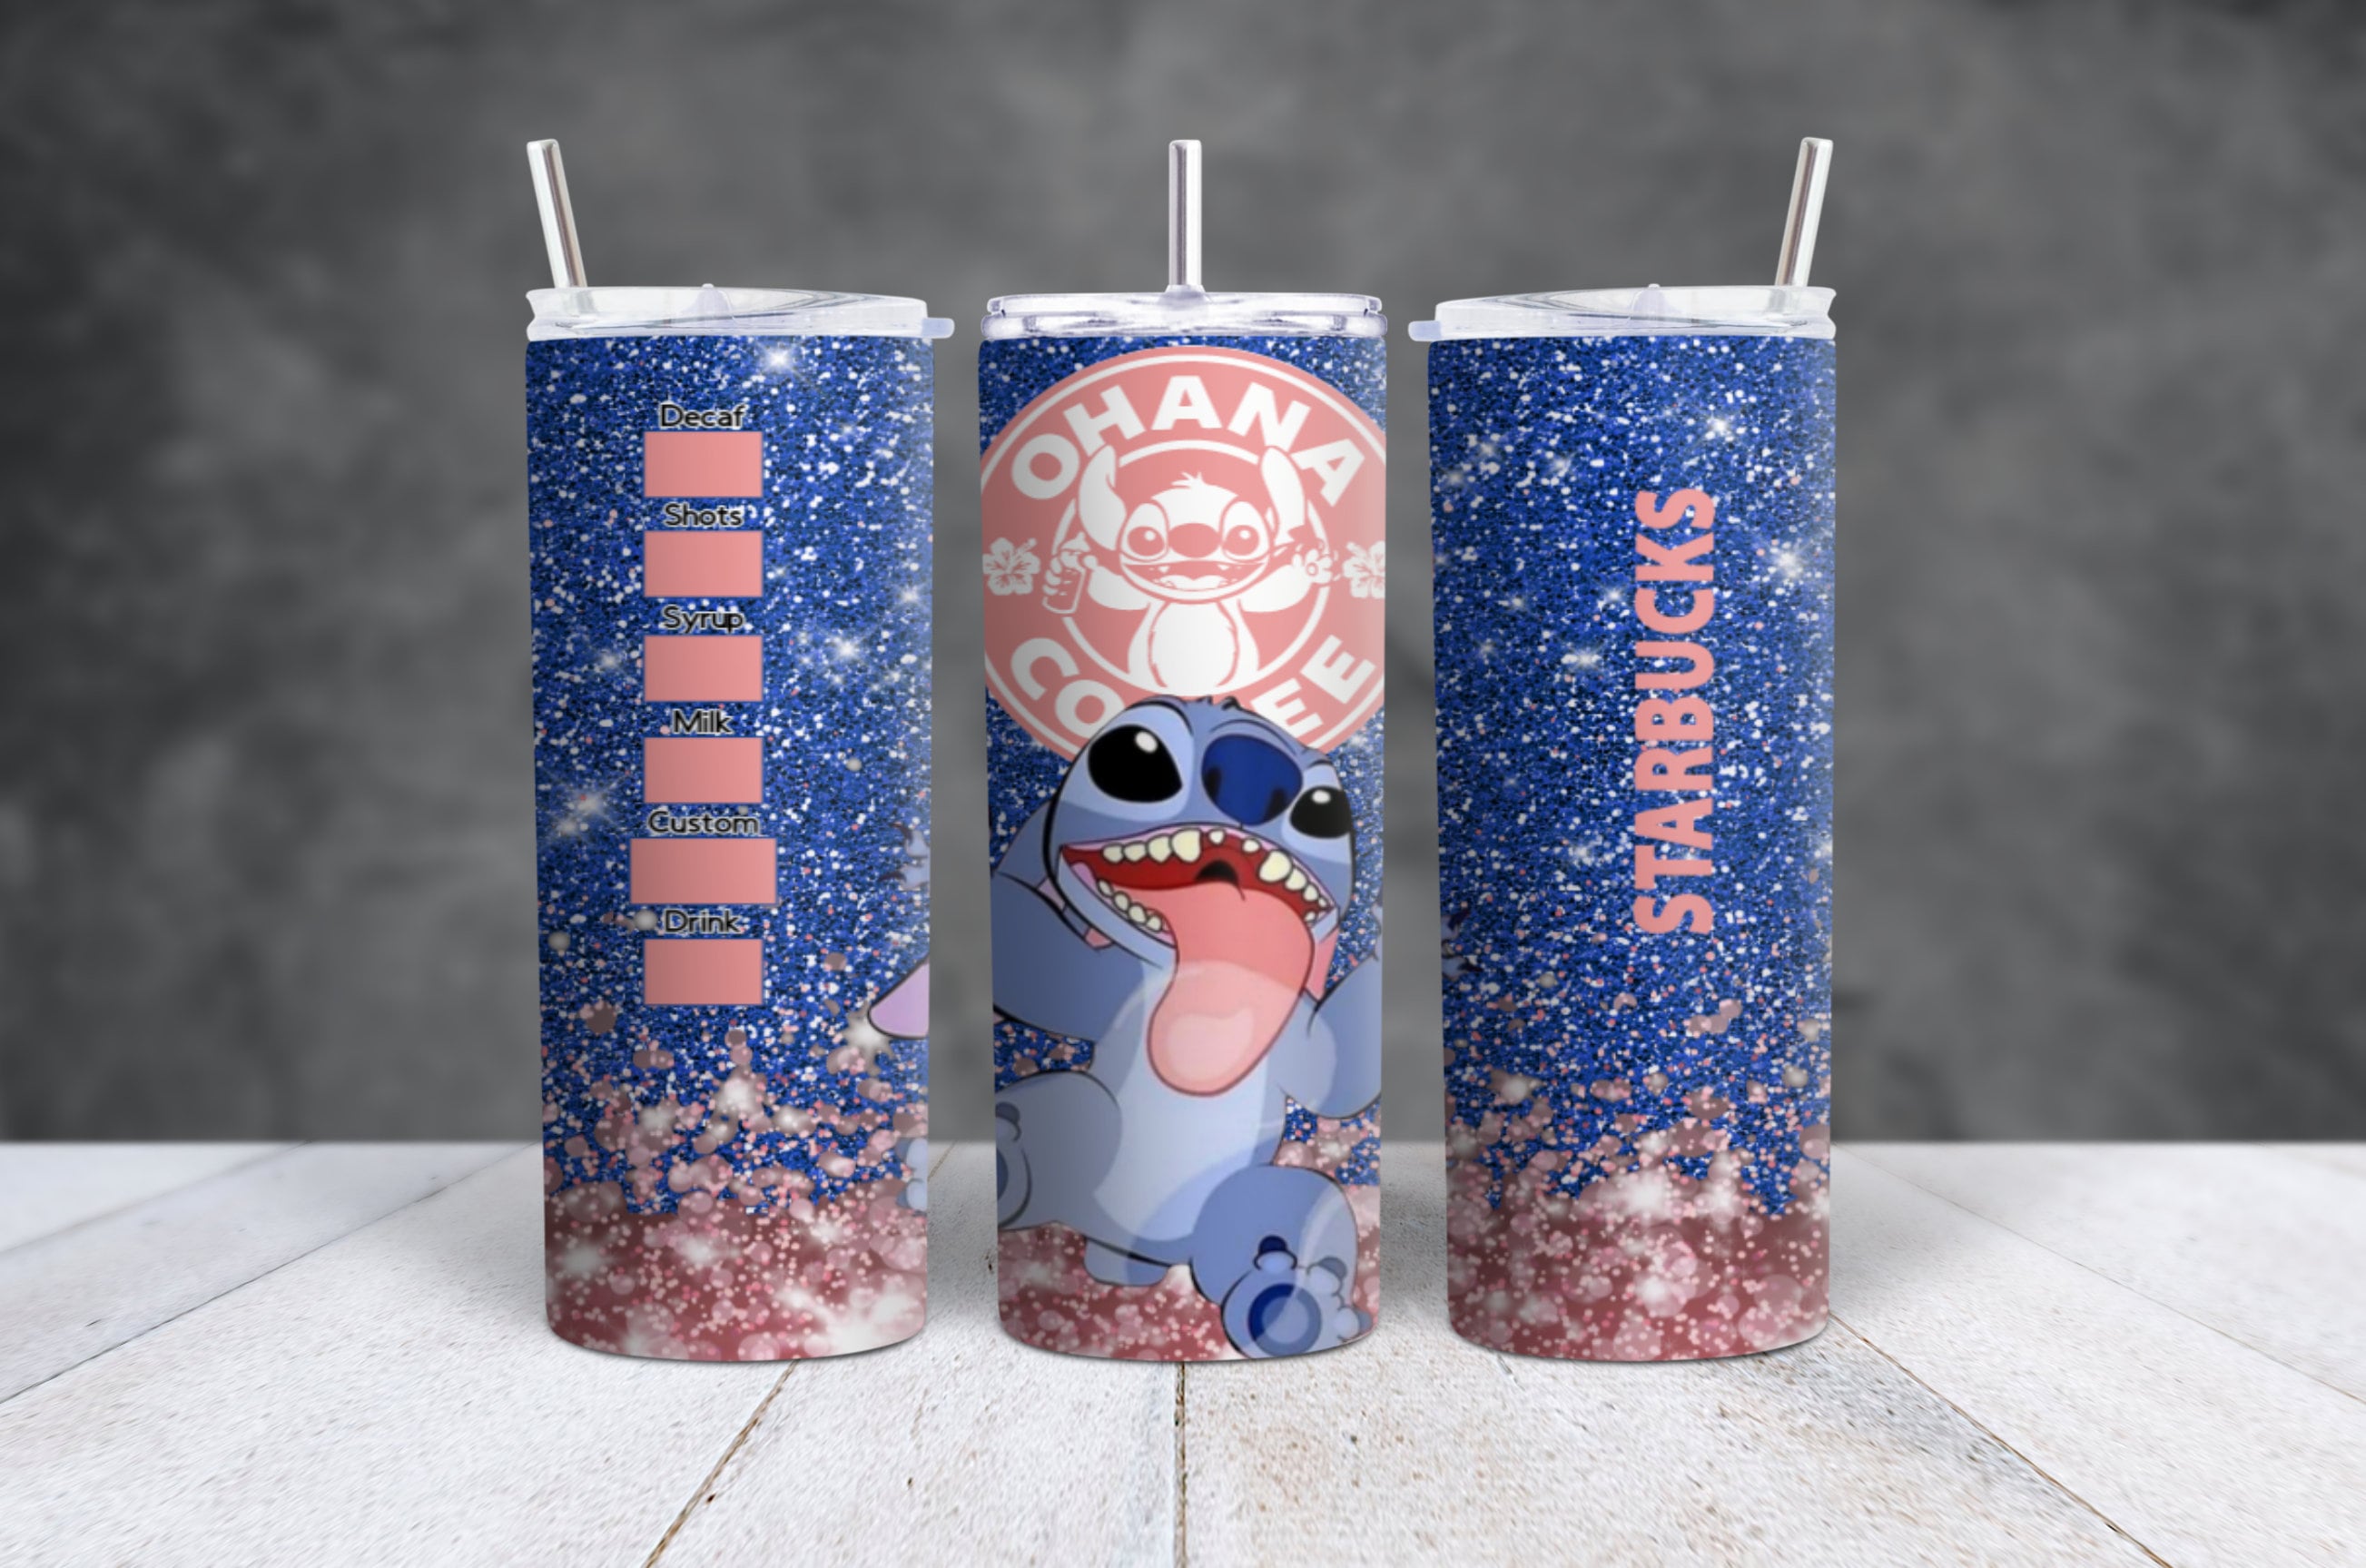 Stitch And Angel Love Starbucks Cold Cup SVG